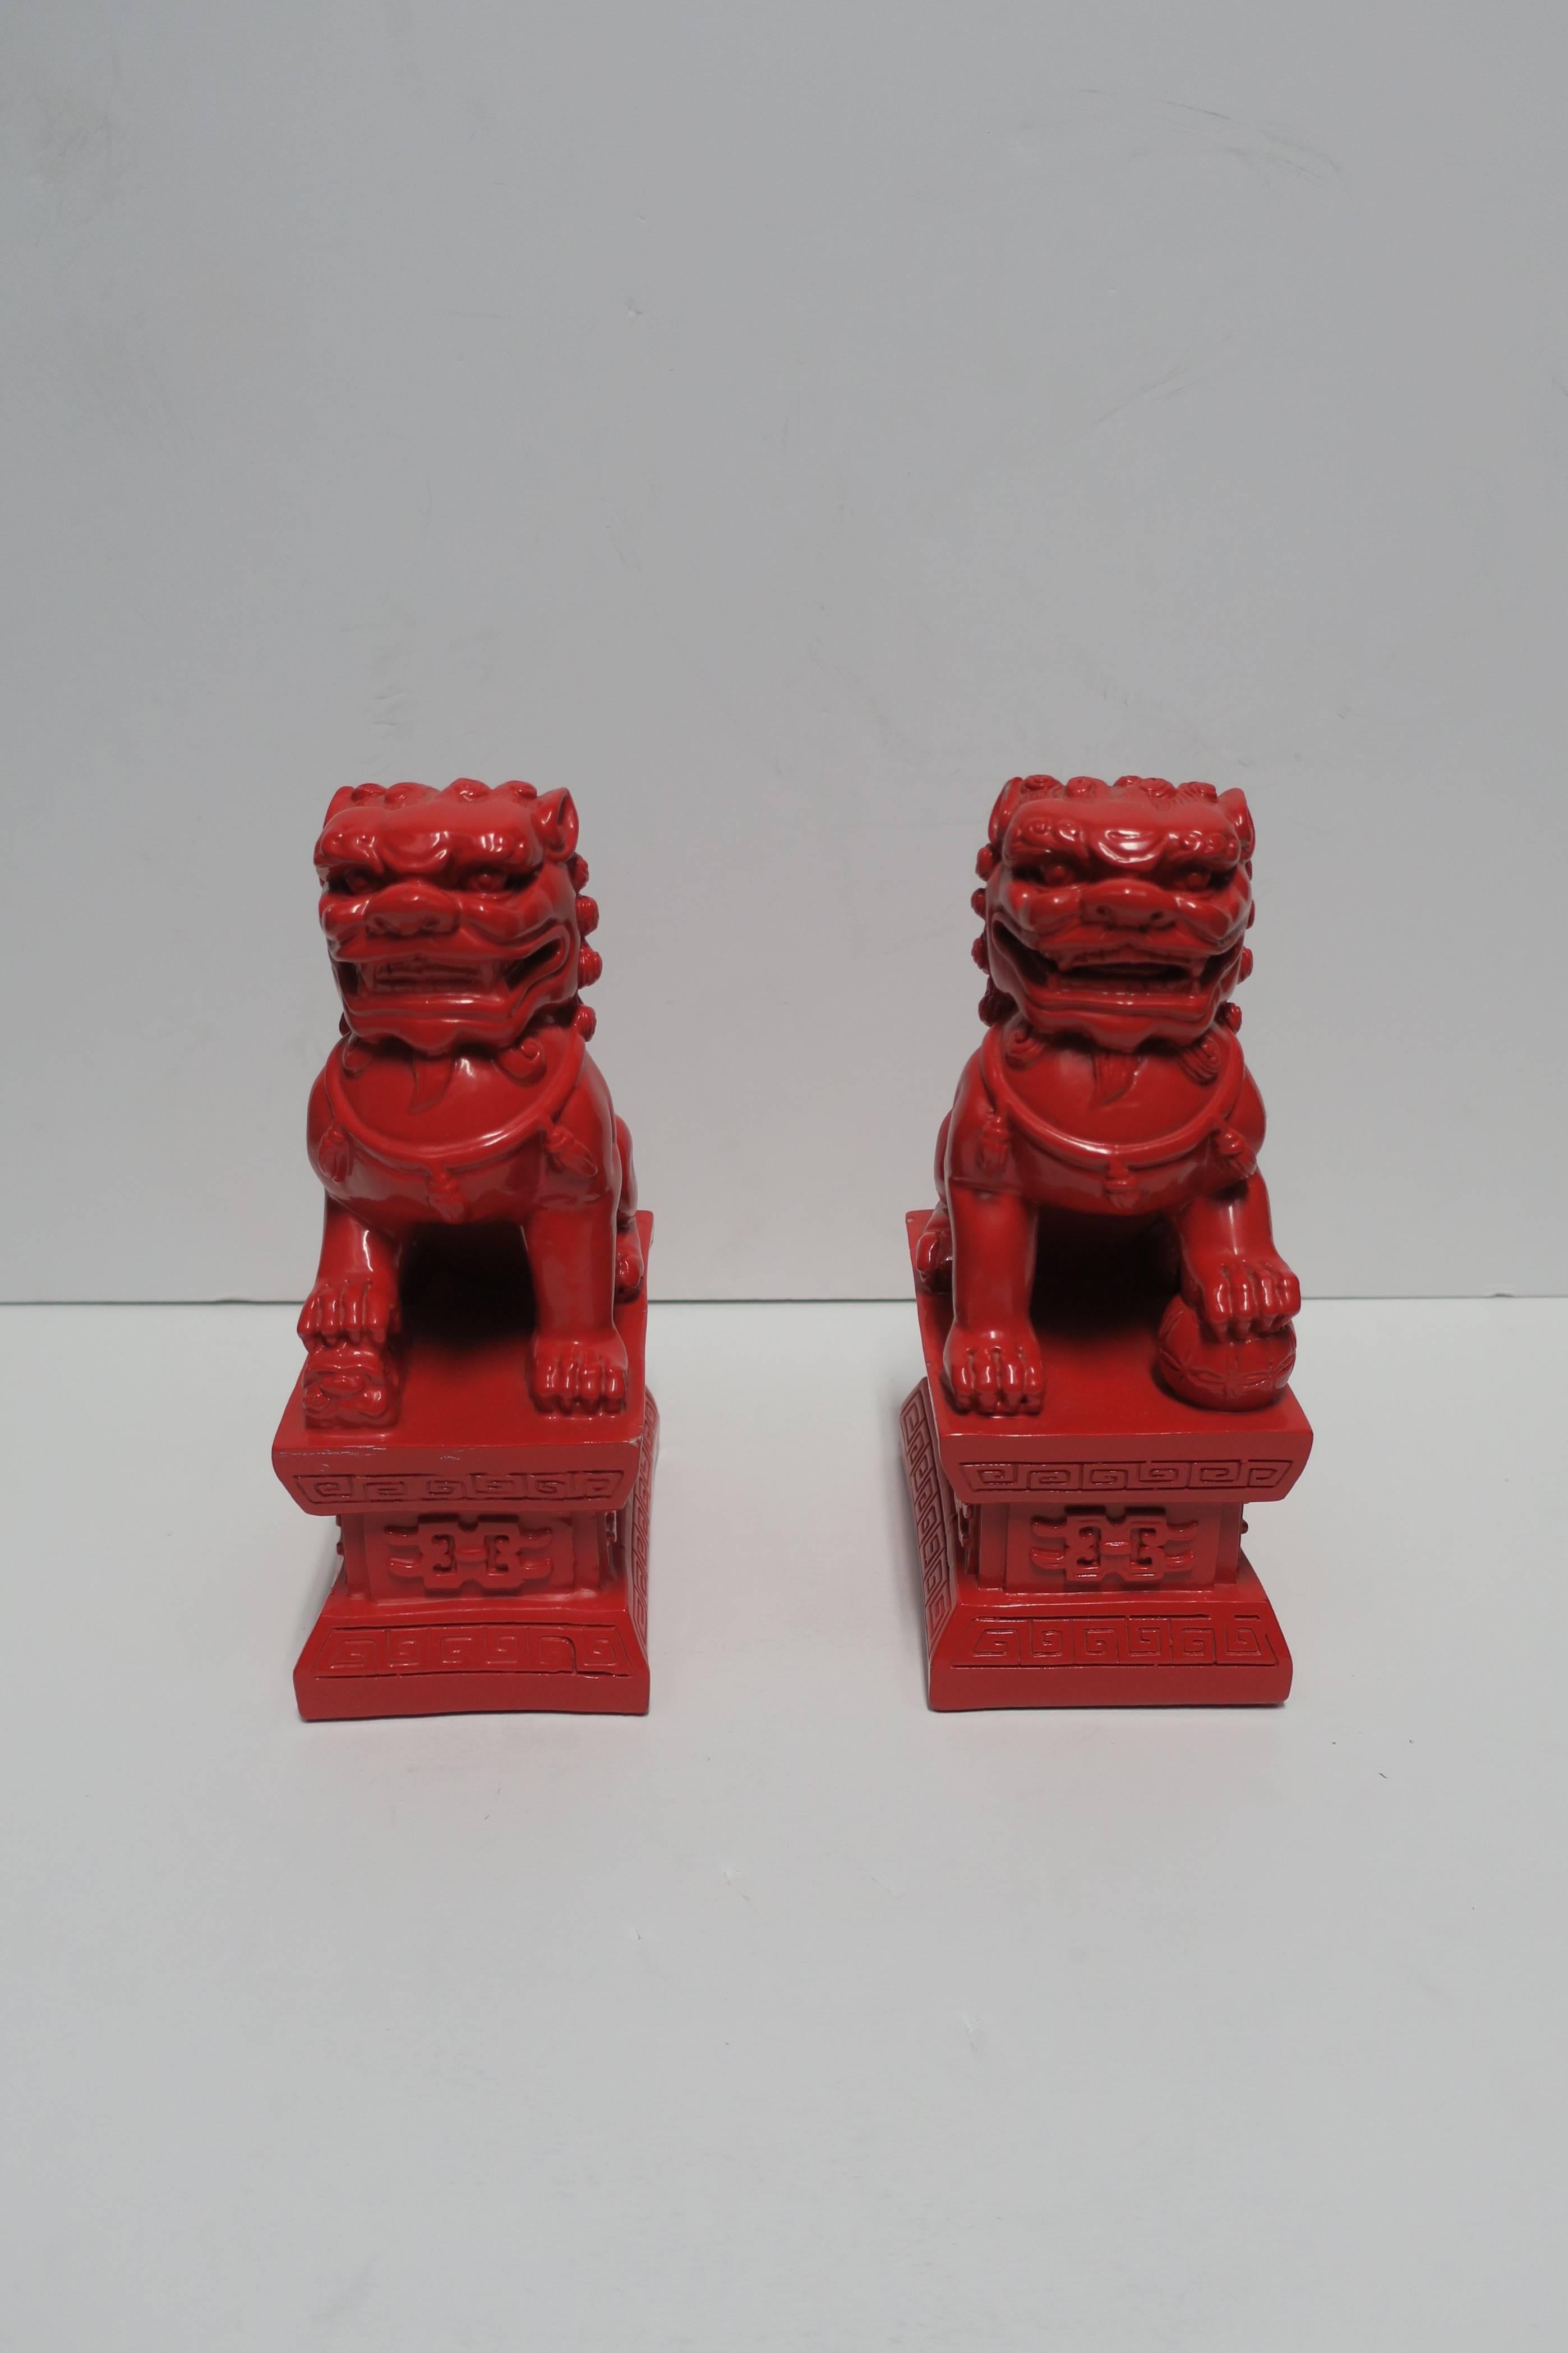 A vintage pair/set of red lacquer foo dog or lion bookends/decorative objects. Relatively tall, each measuring 9.75 in. H.

Measurements: 3.75 in. W x 5.75 in. D x 9.75 in. H

